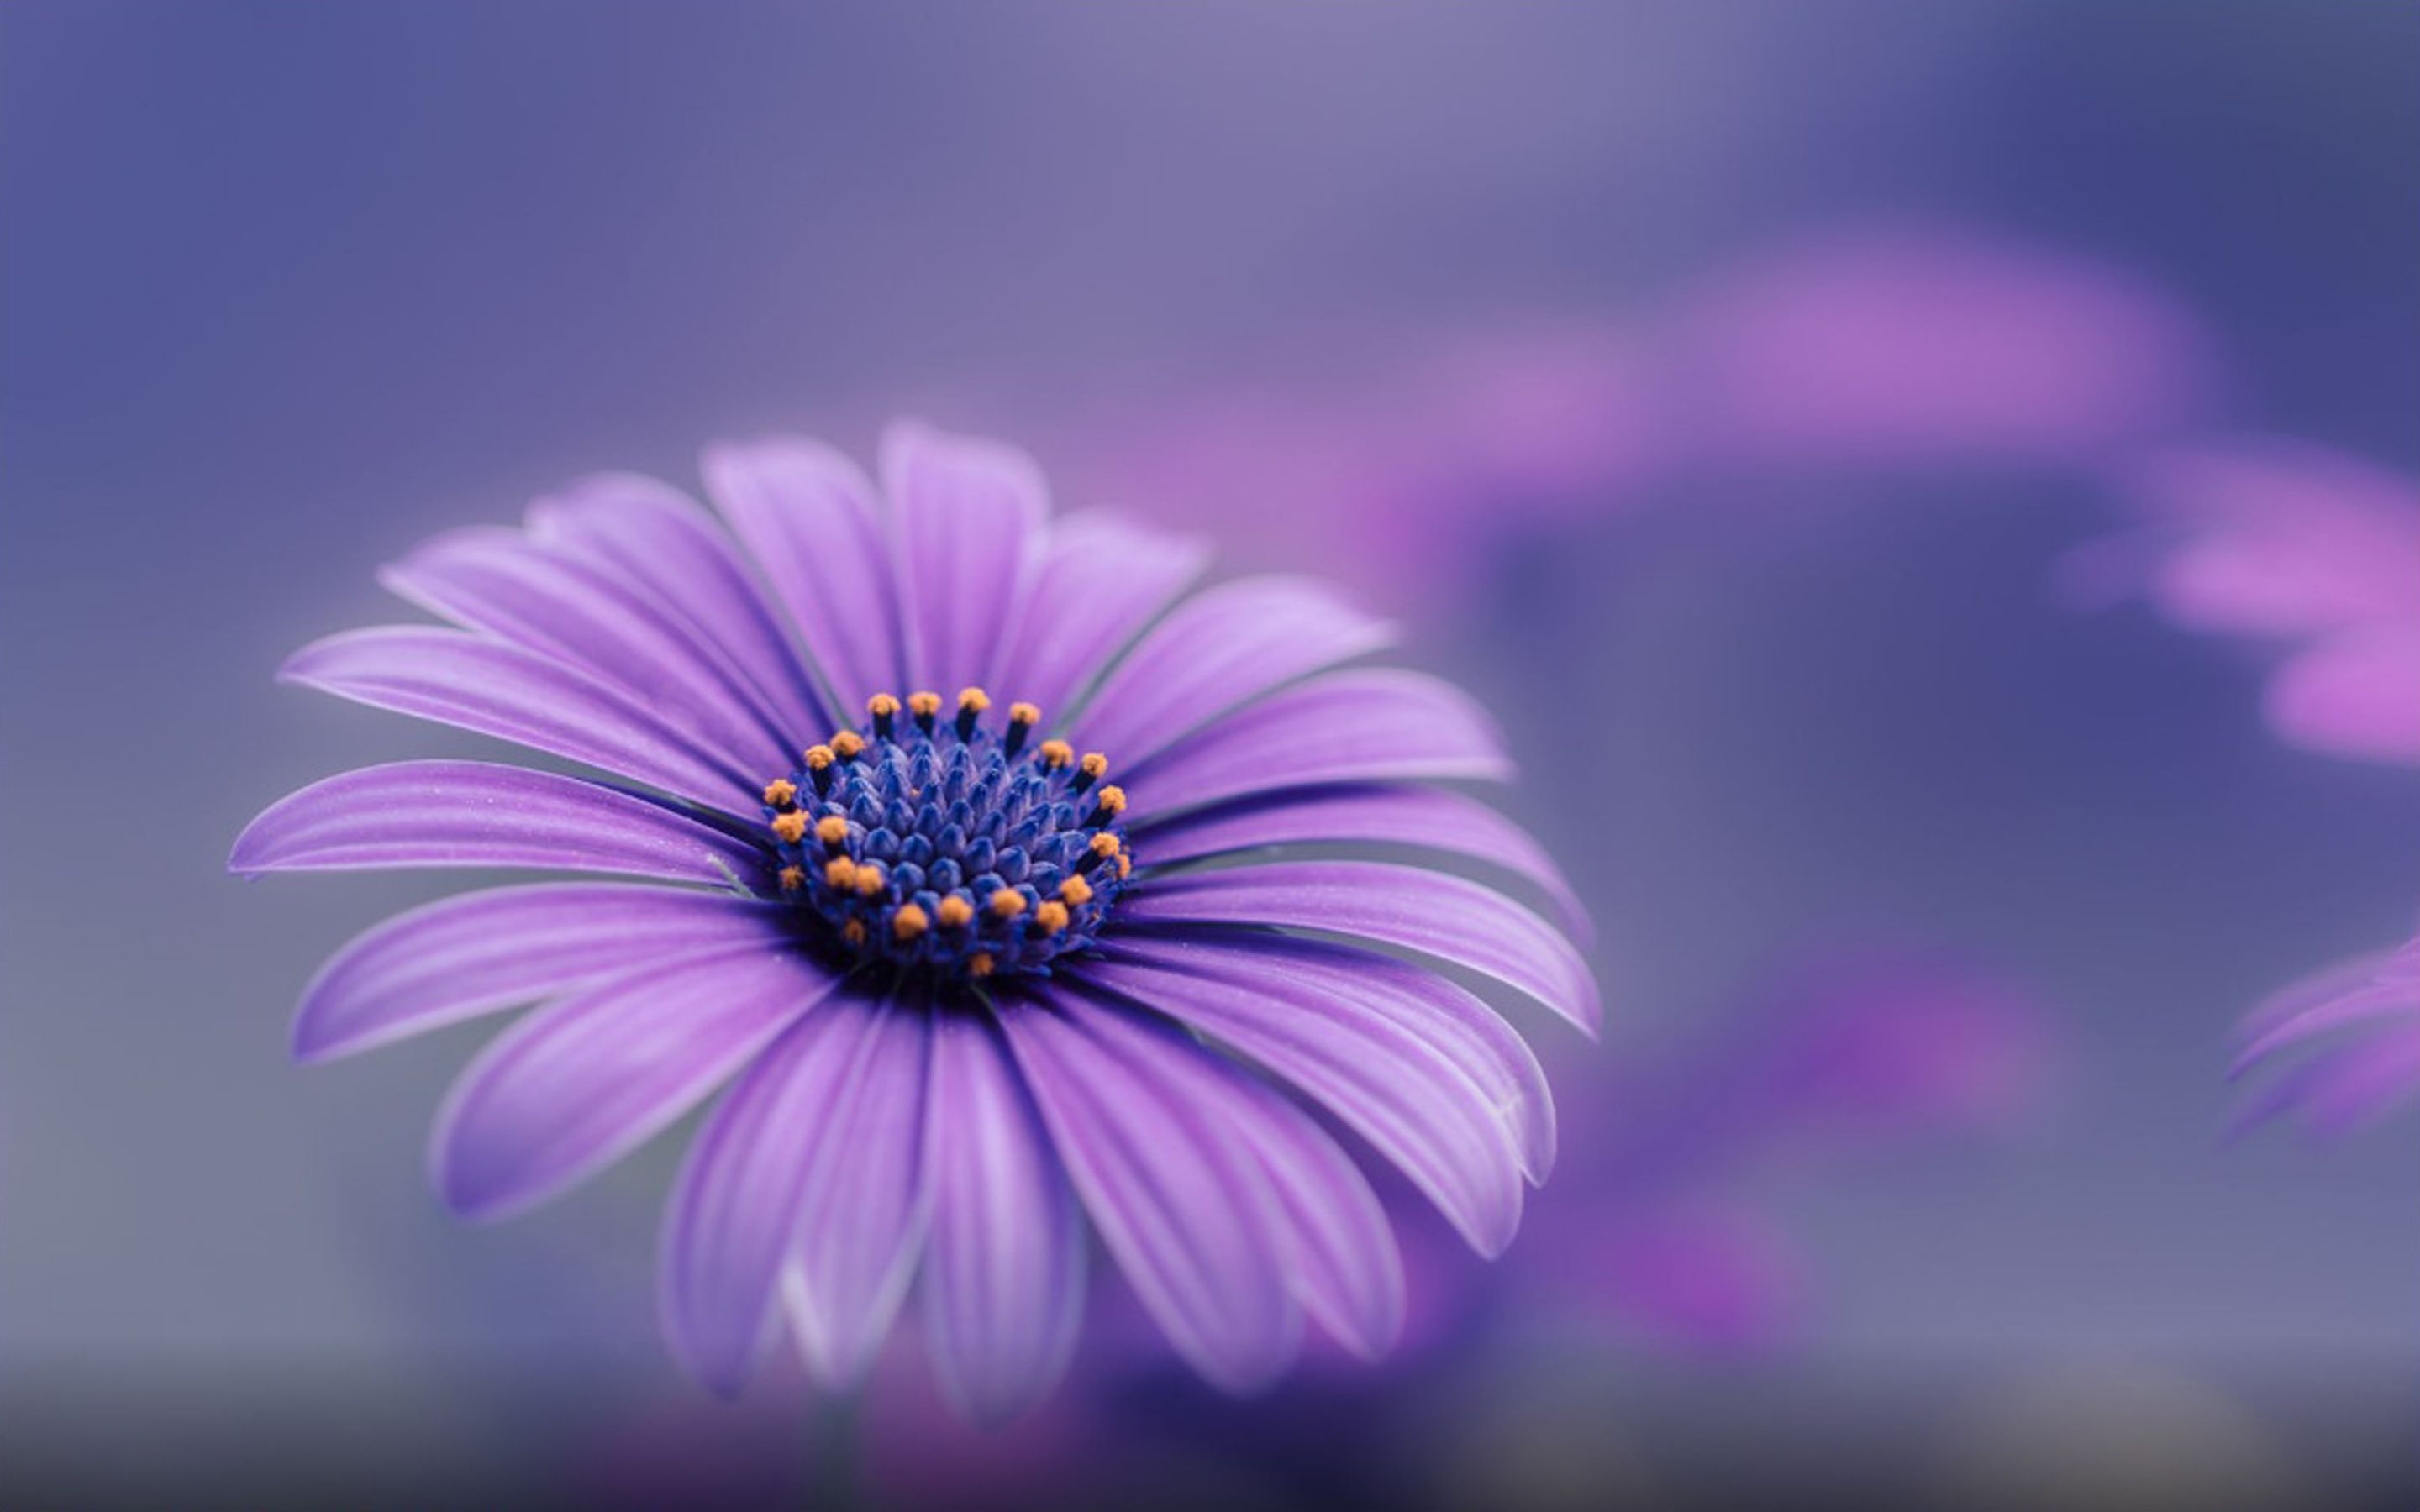 Purple Blue Flower HD Wallpaper For Mobile Phones And Computers